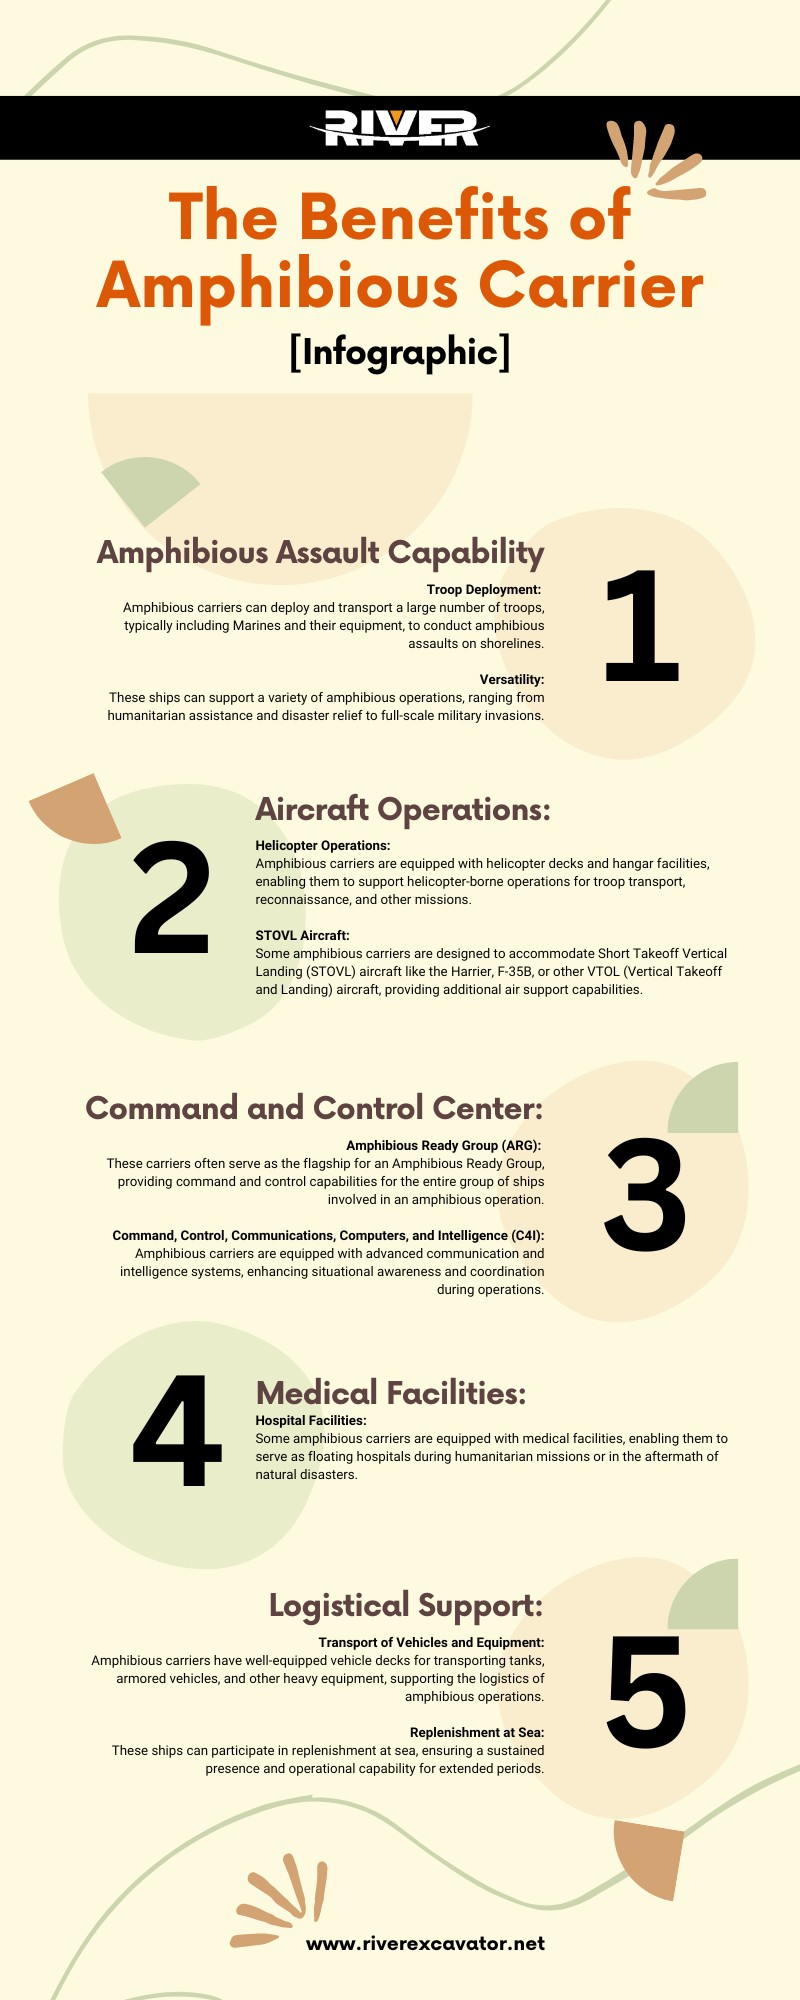 The Benefits of Amphibious Carrier [Infographic]